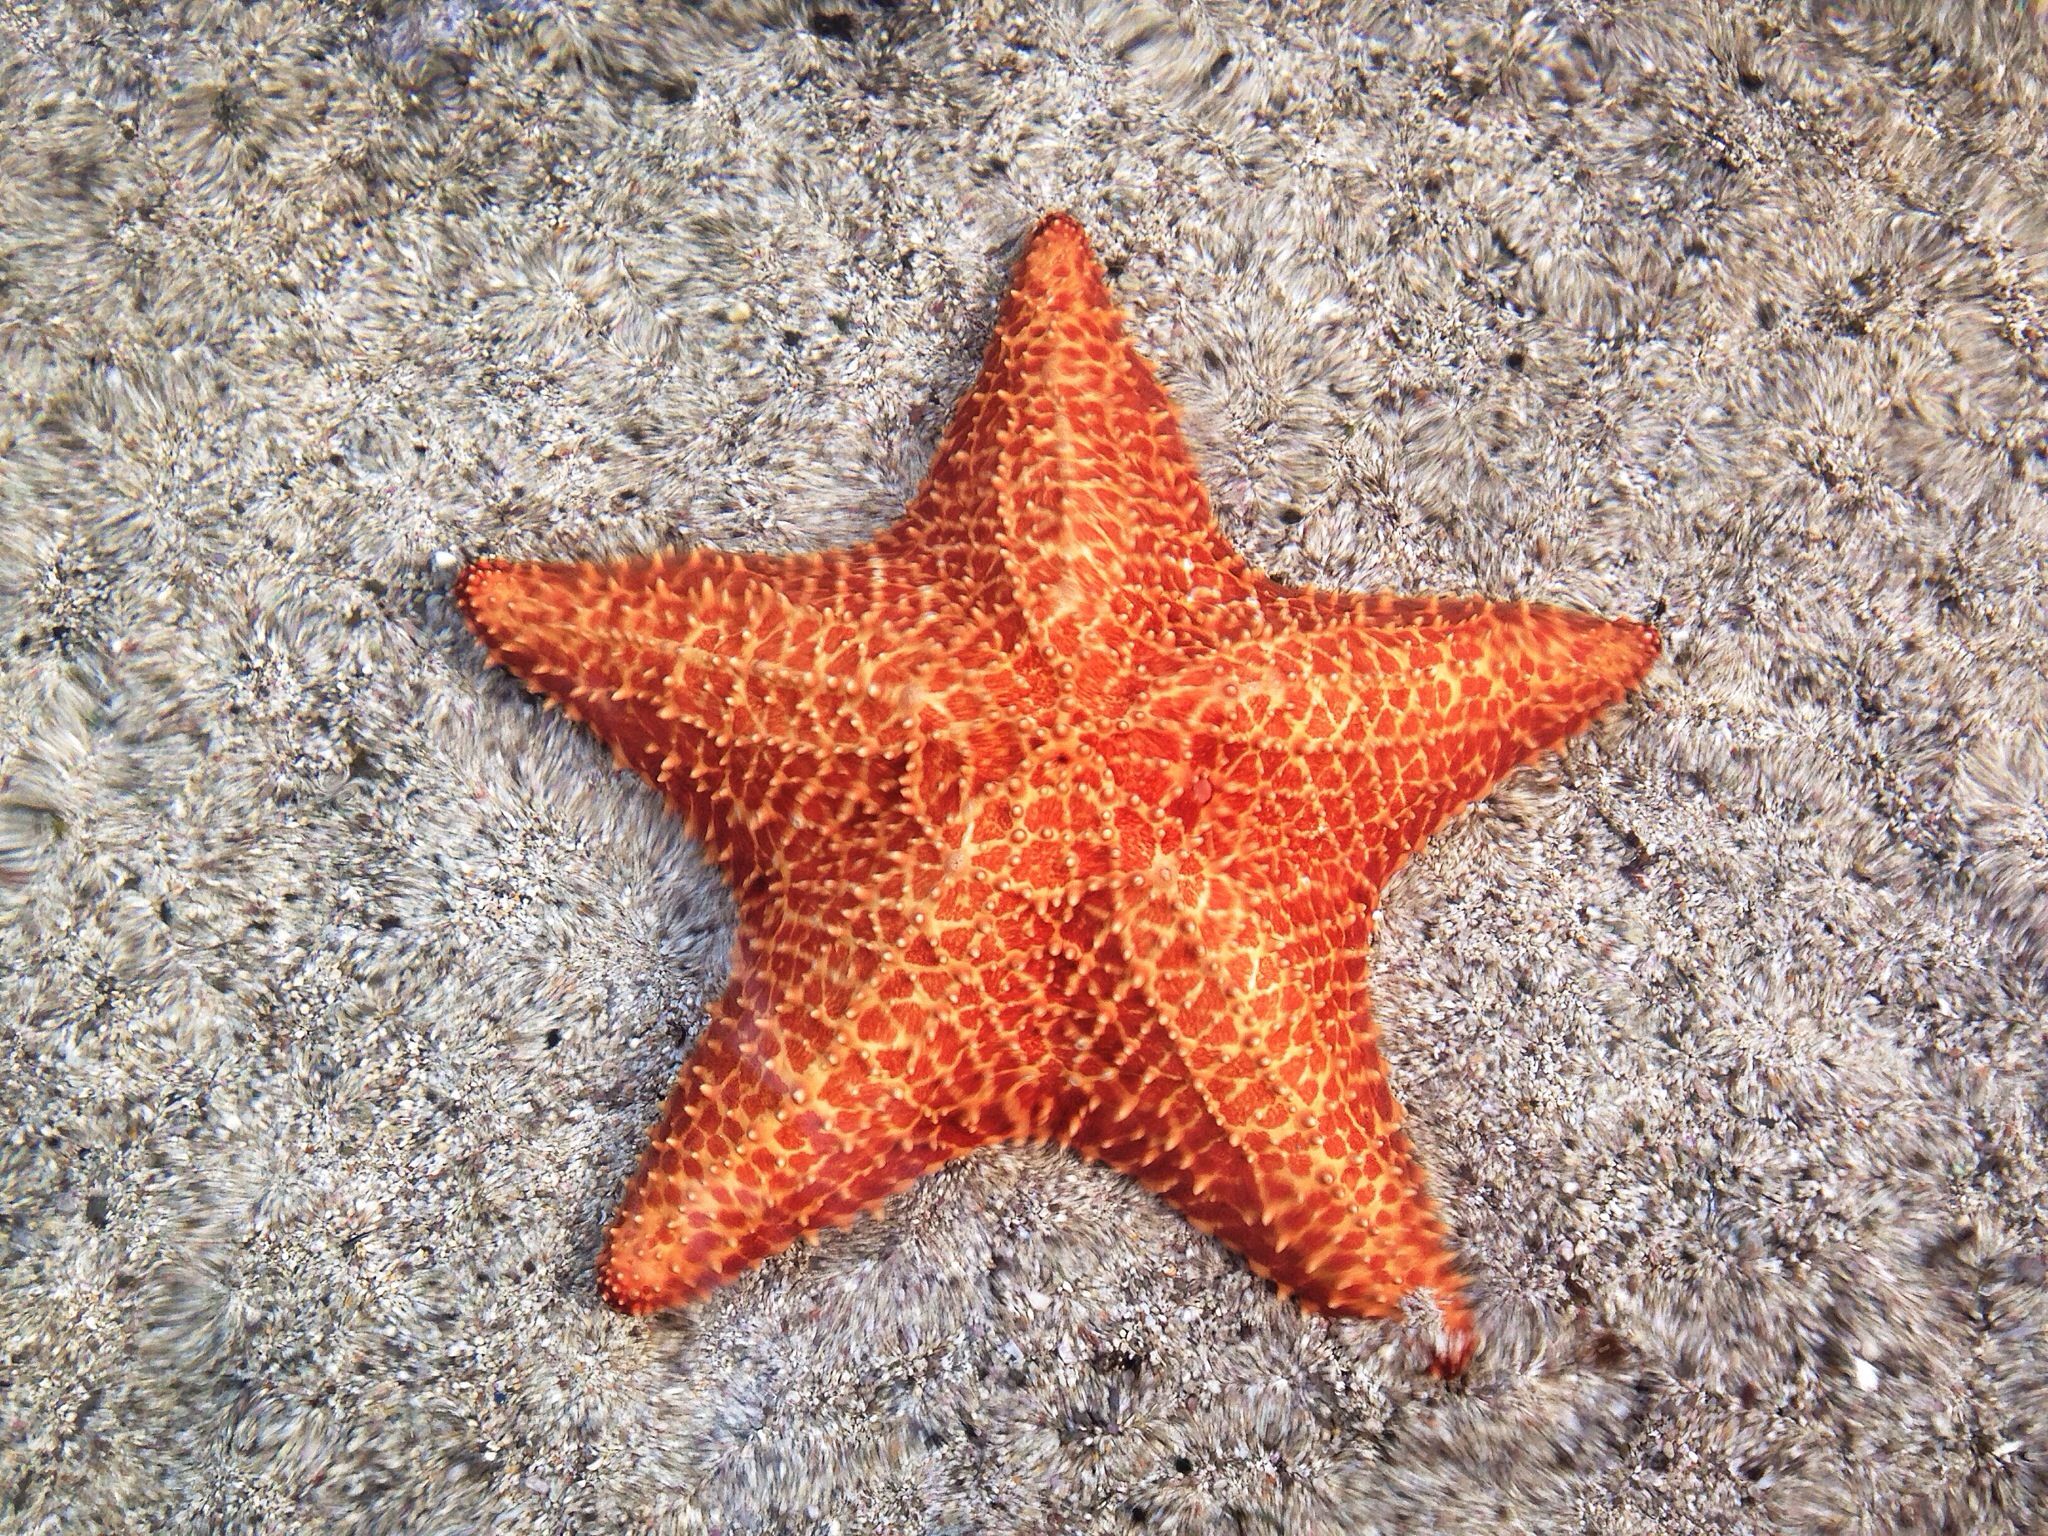 Interesting facts about starfish brains